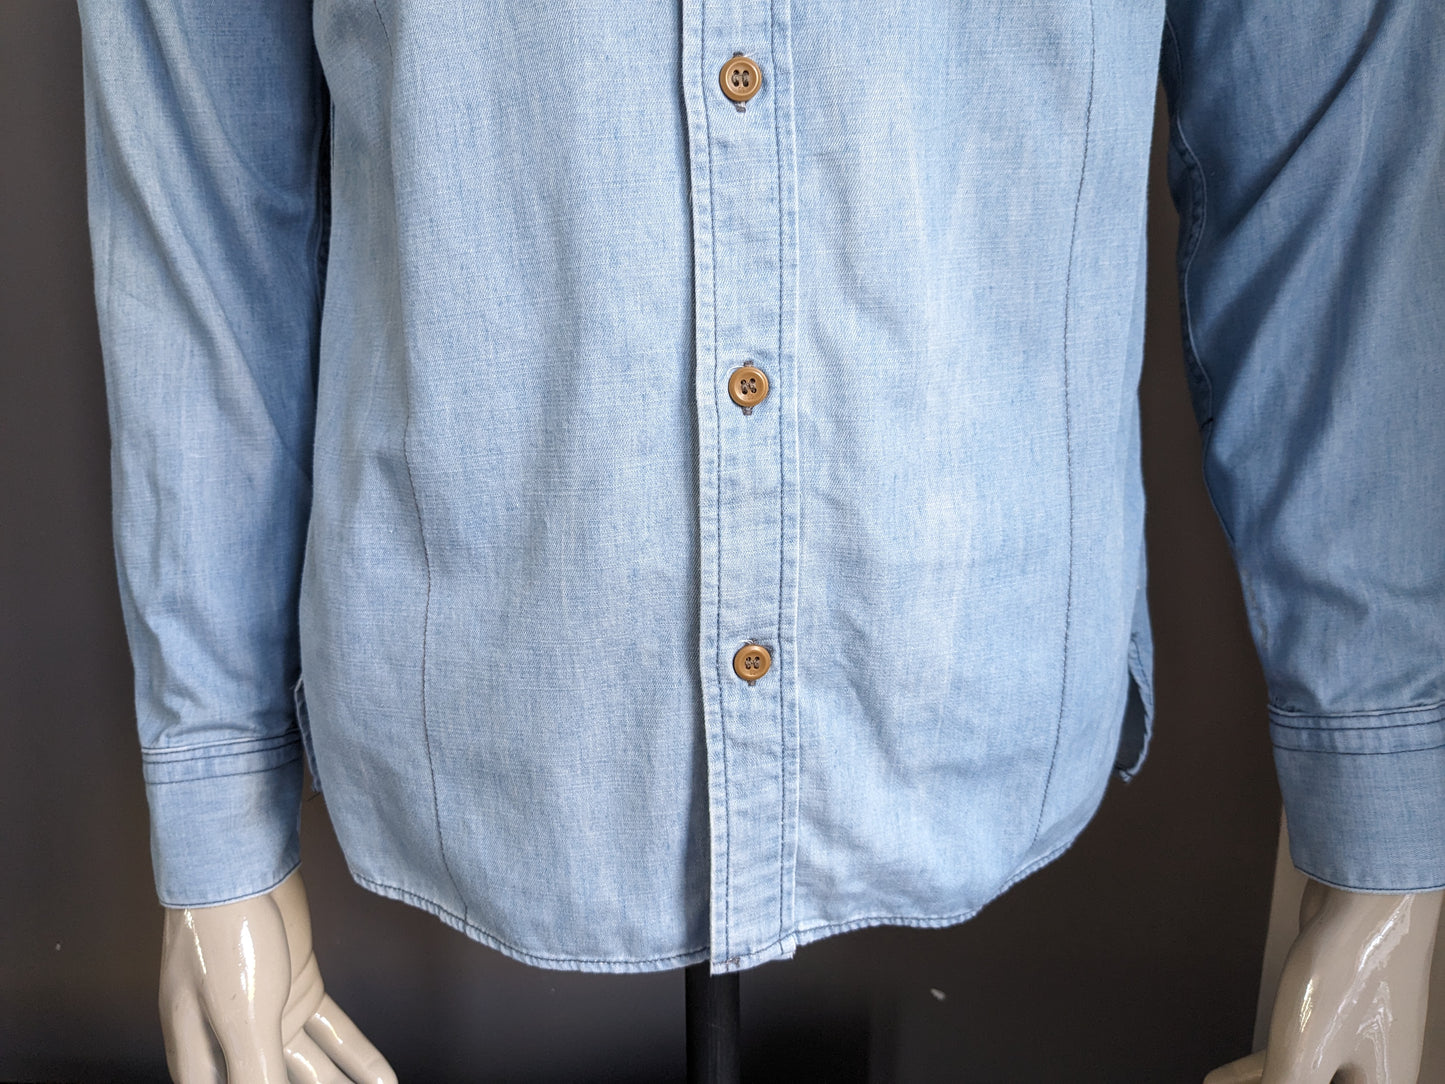 G-Star Raw Jeans shirt. Light blue colored. Size S.